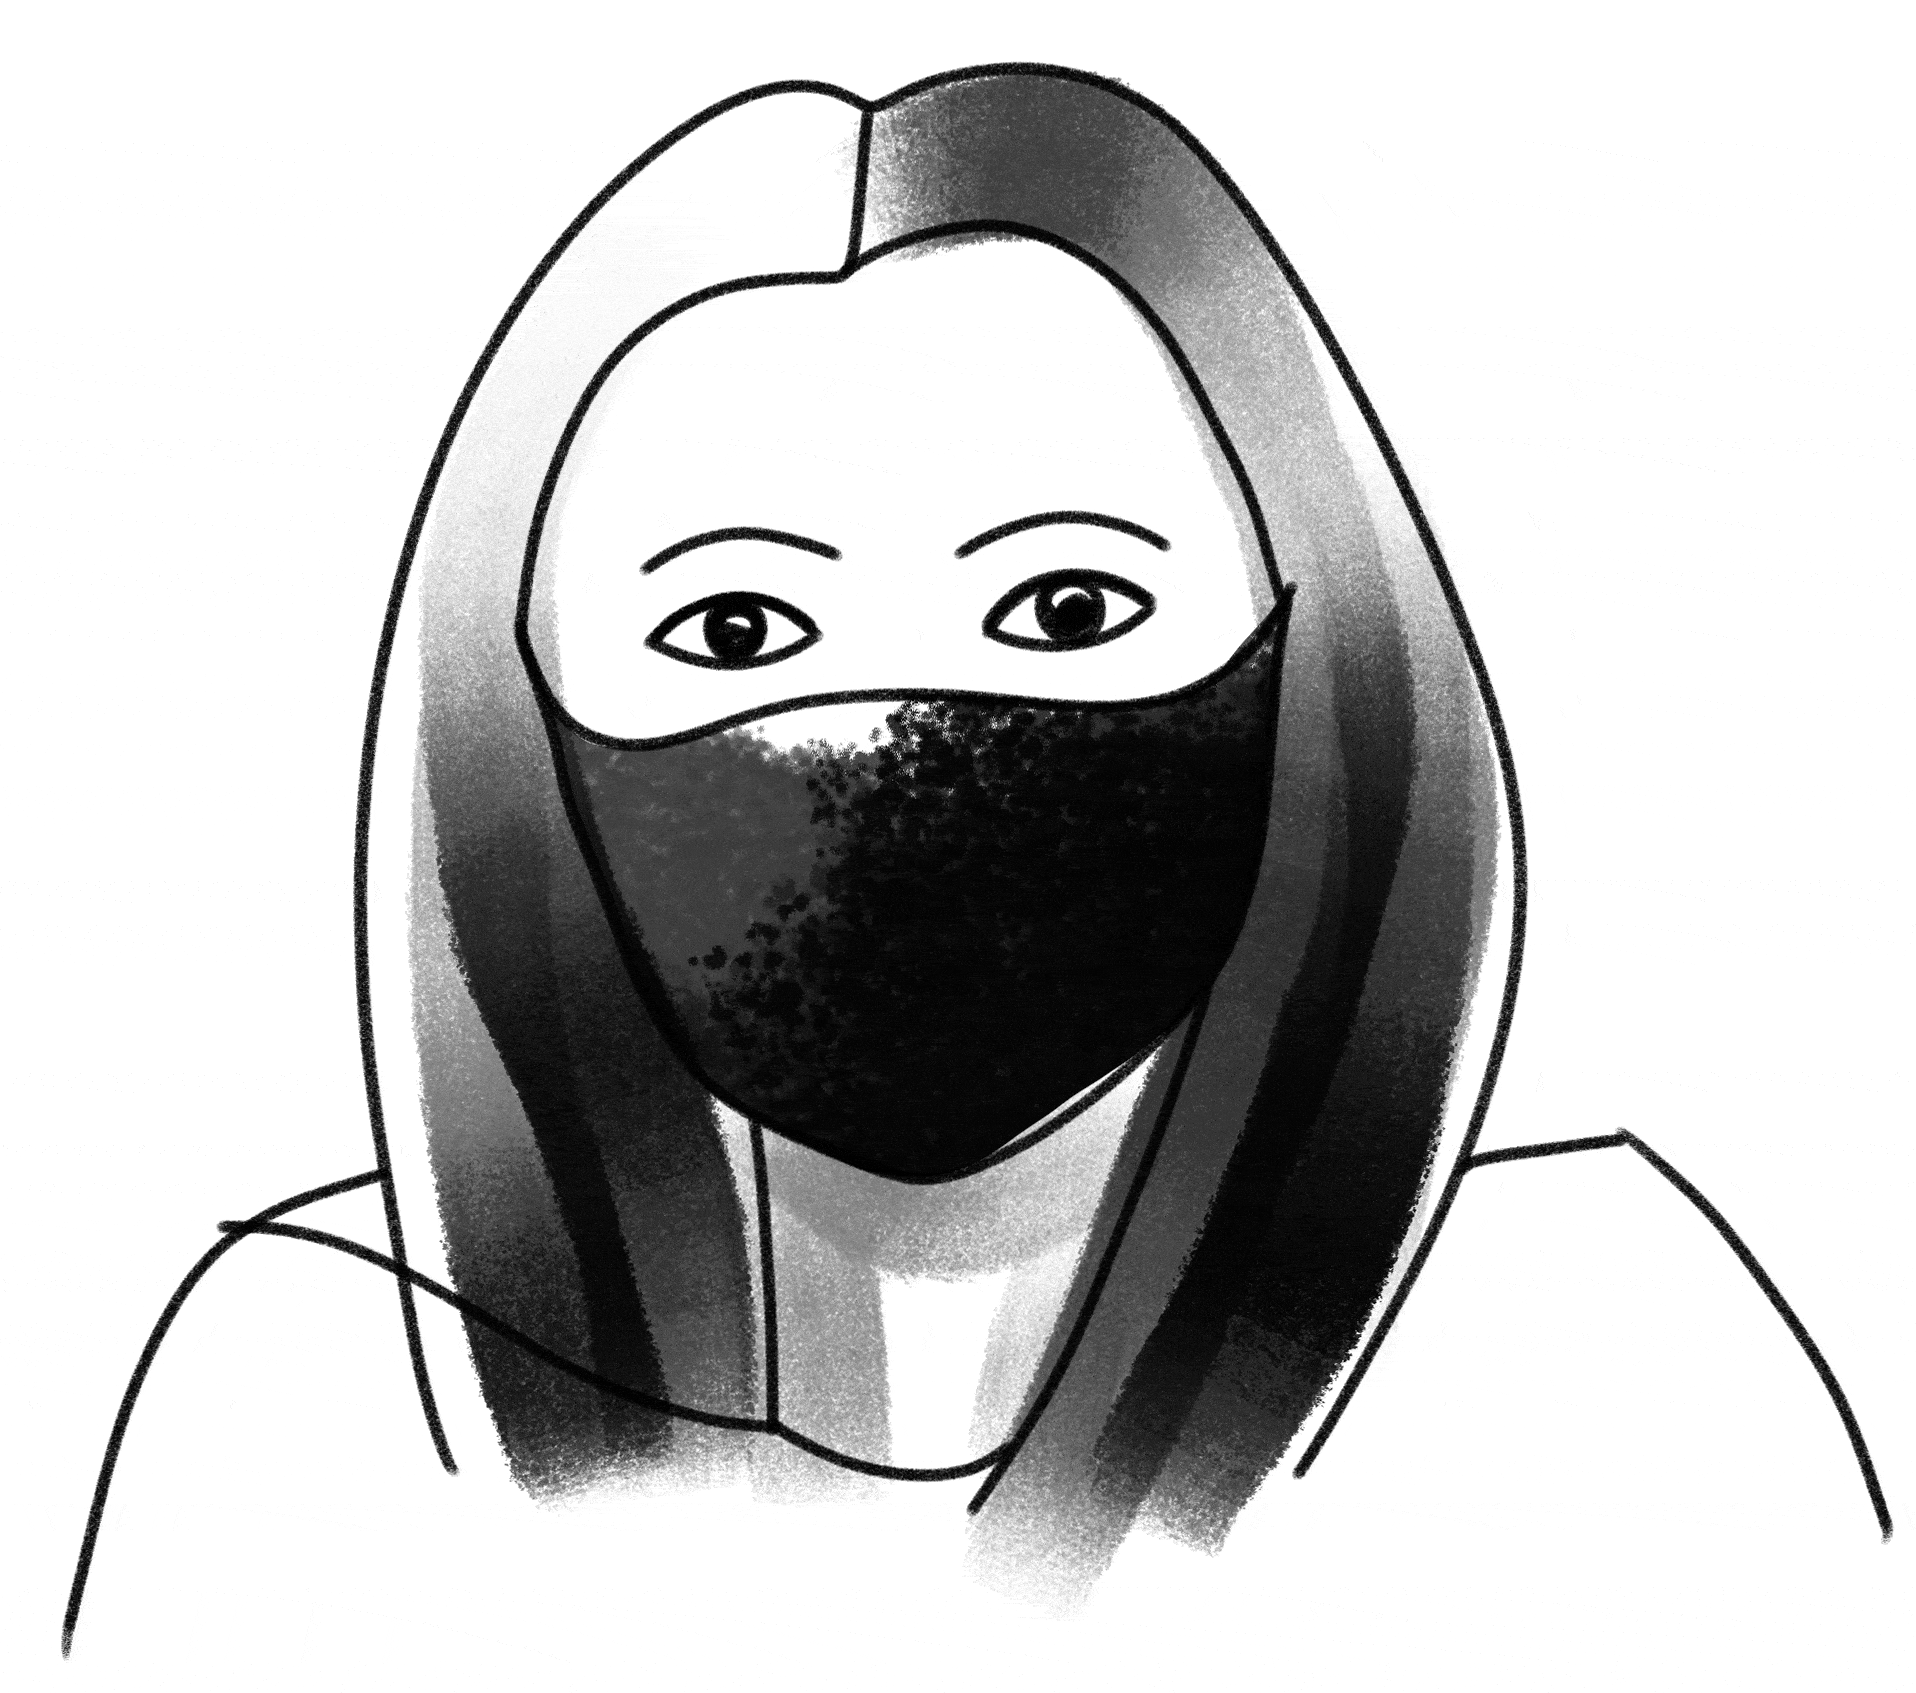 animated GIF of a woman wearing different pattern masks